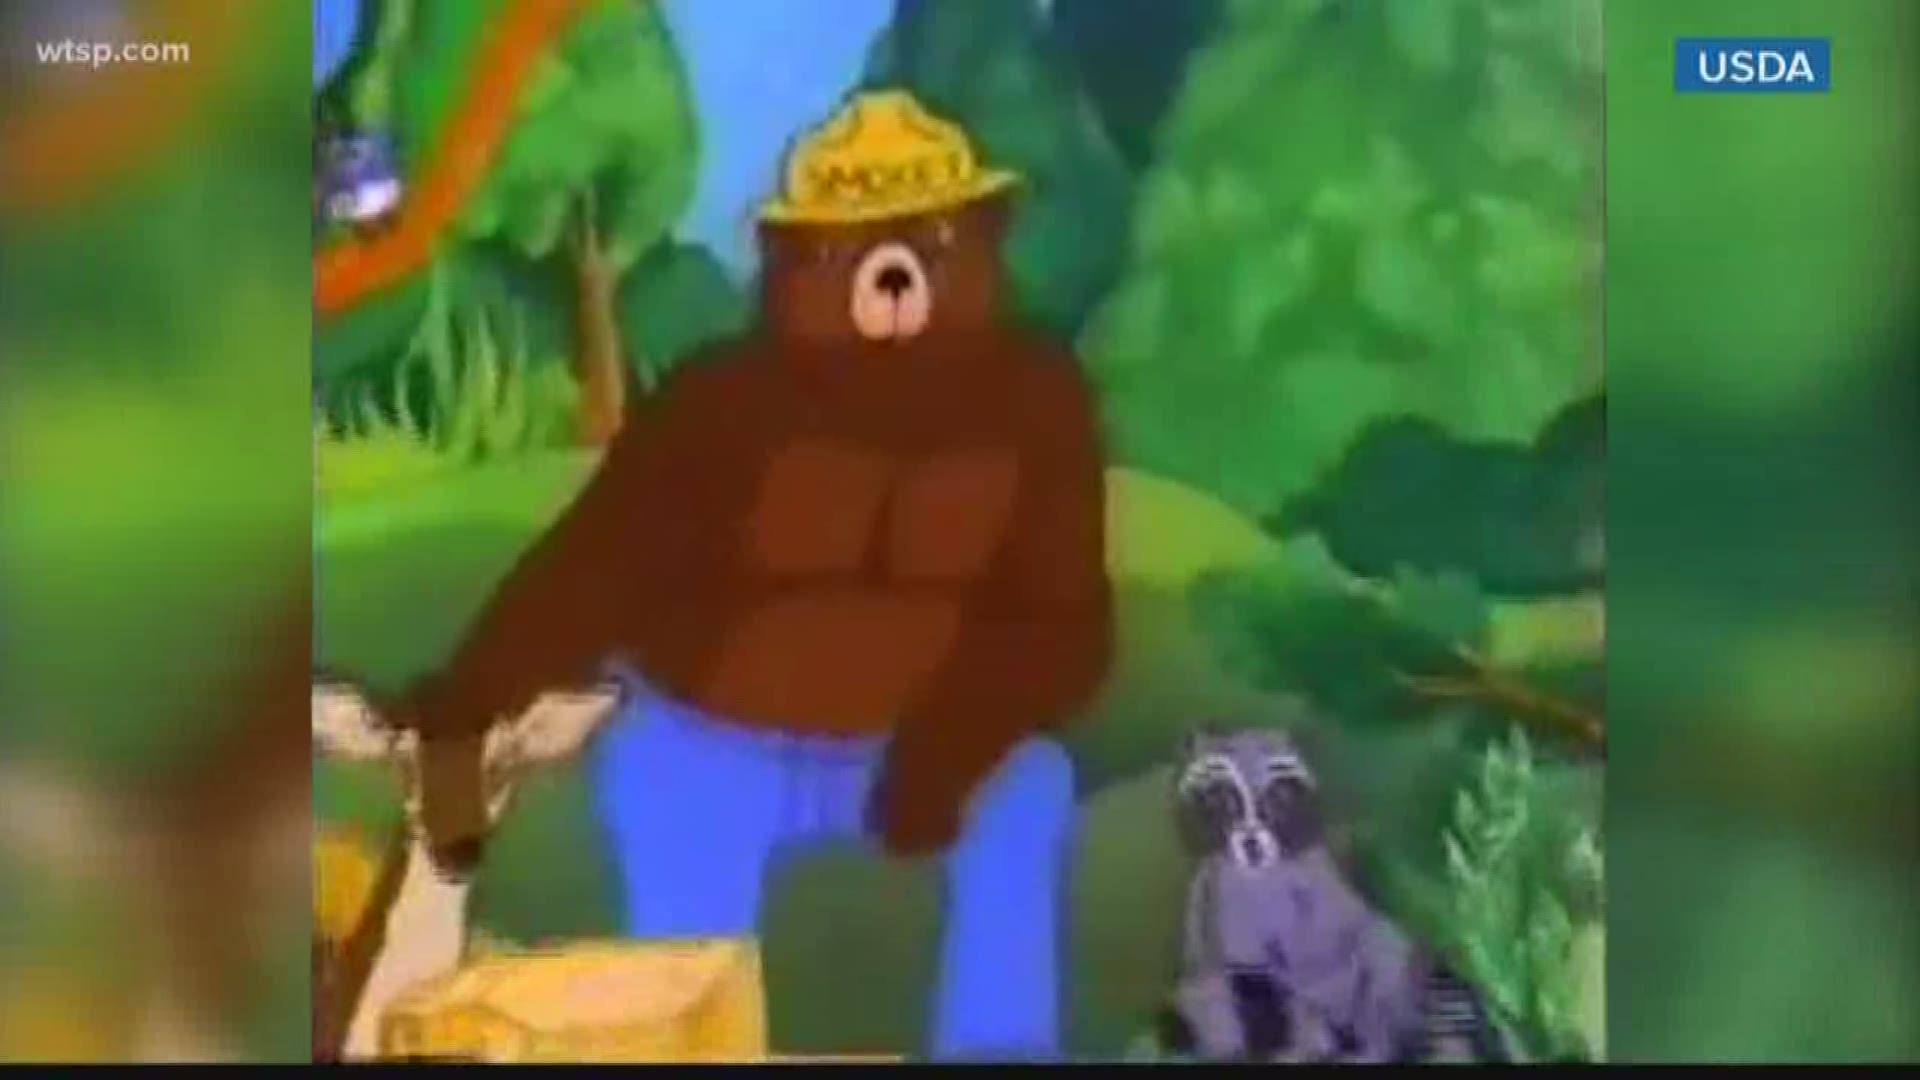 Forest Fire prevention icon Smokey Bear turns 75 